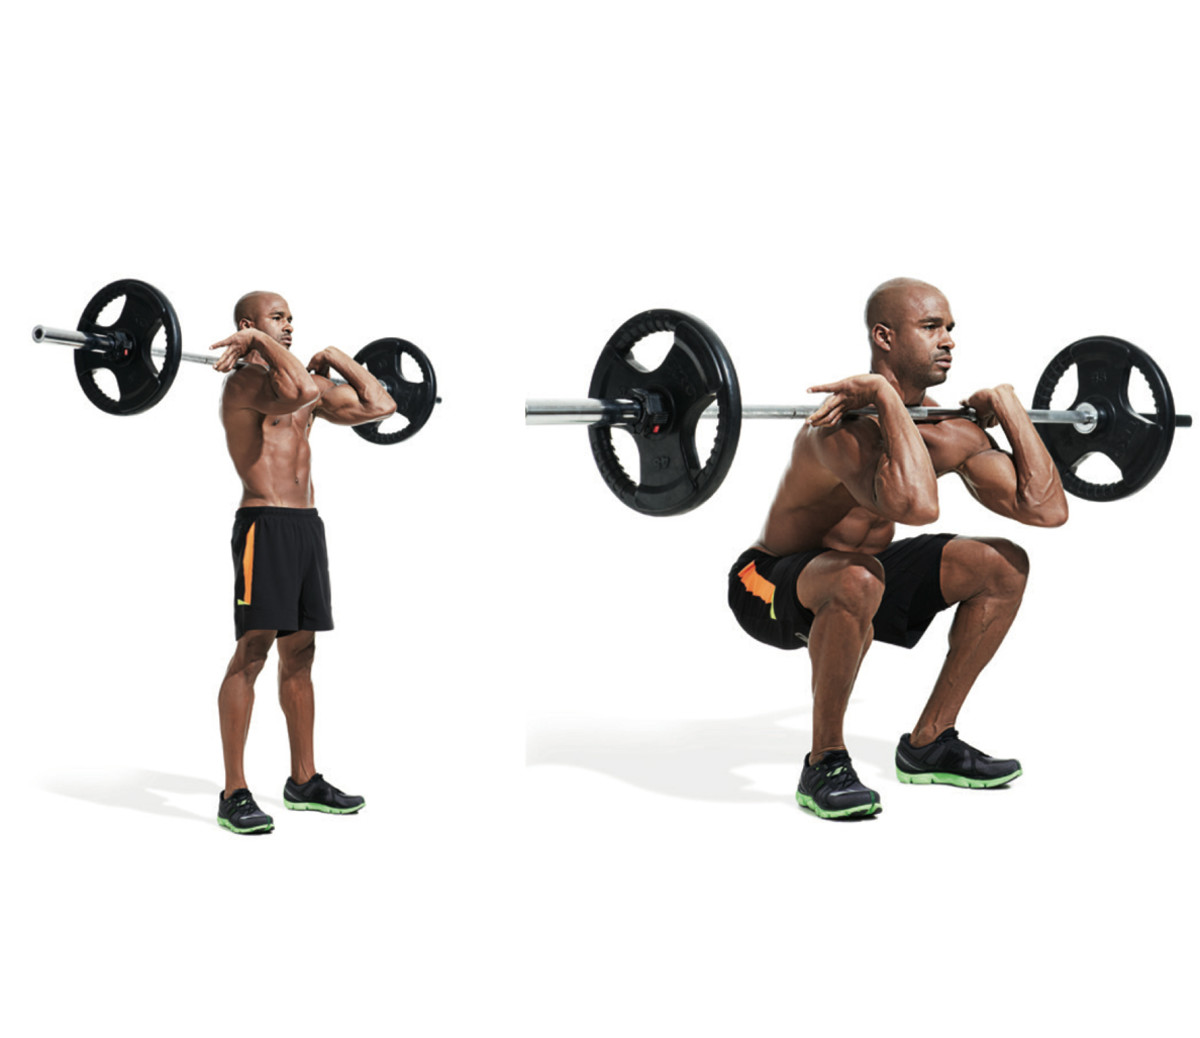 Are squats with weights more effective for health and fitness?